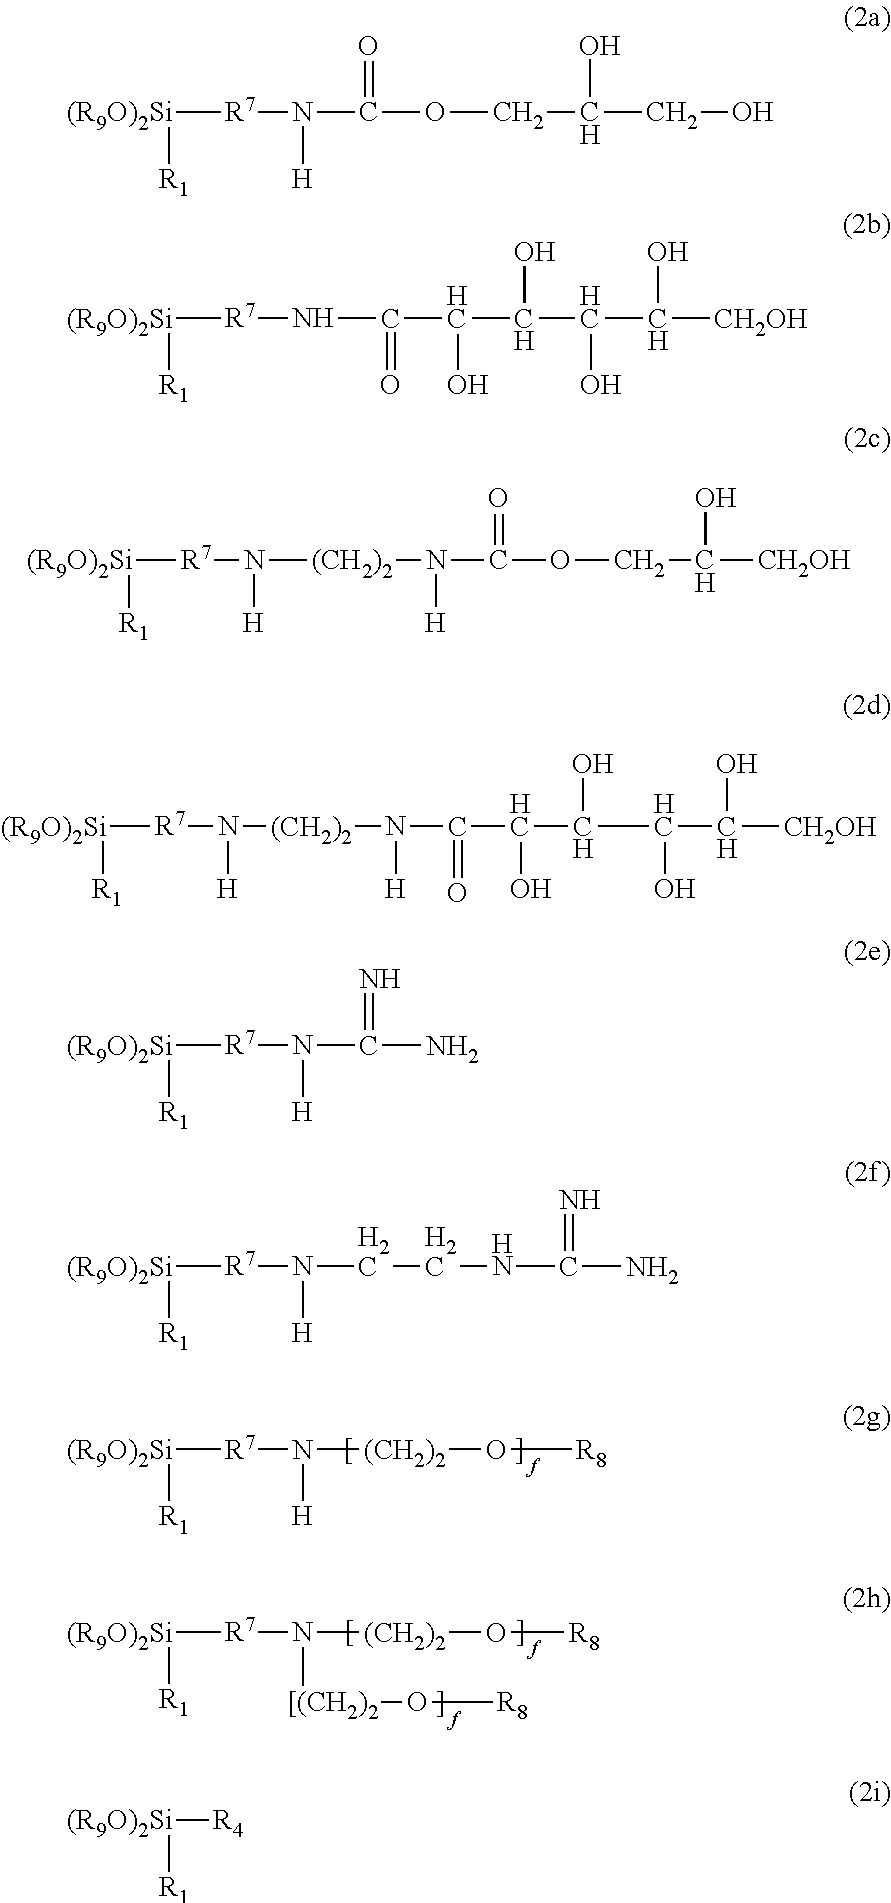 Polysiloxanes With Nitrogen-Containing Groups